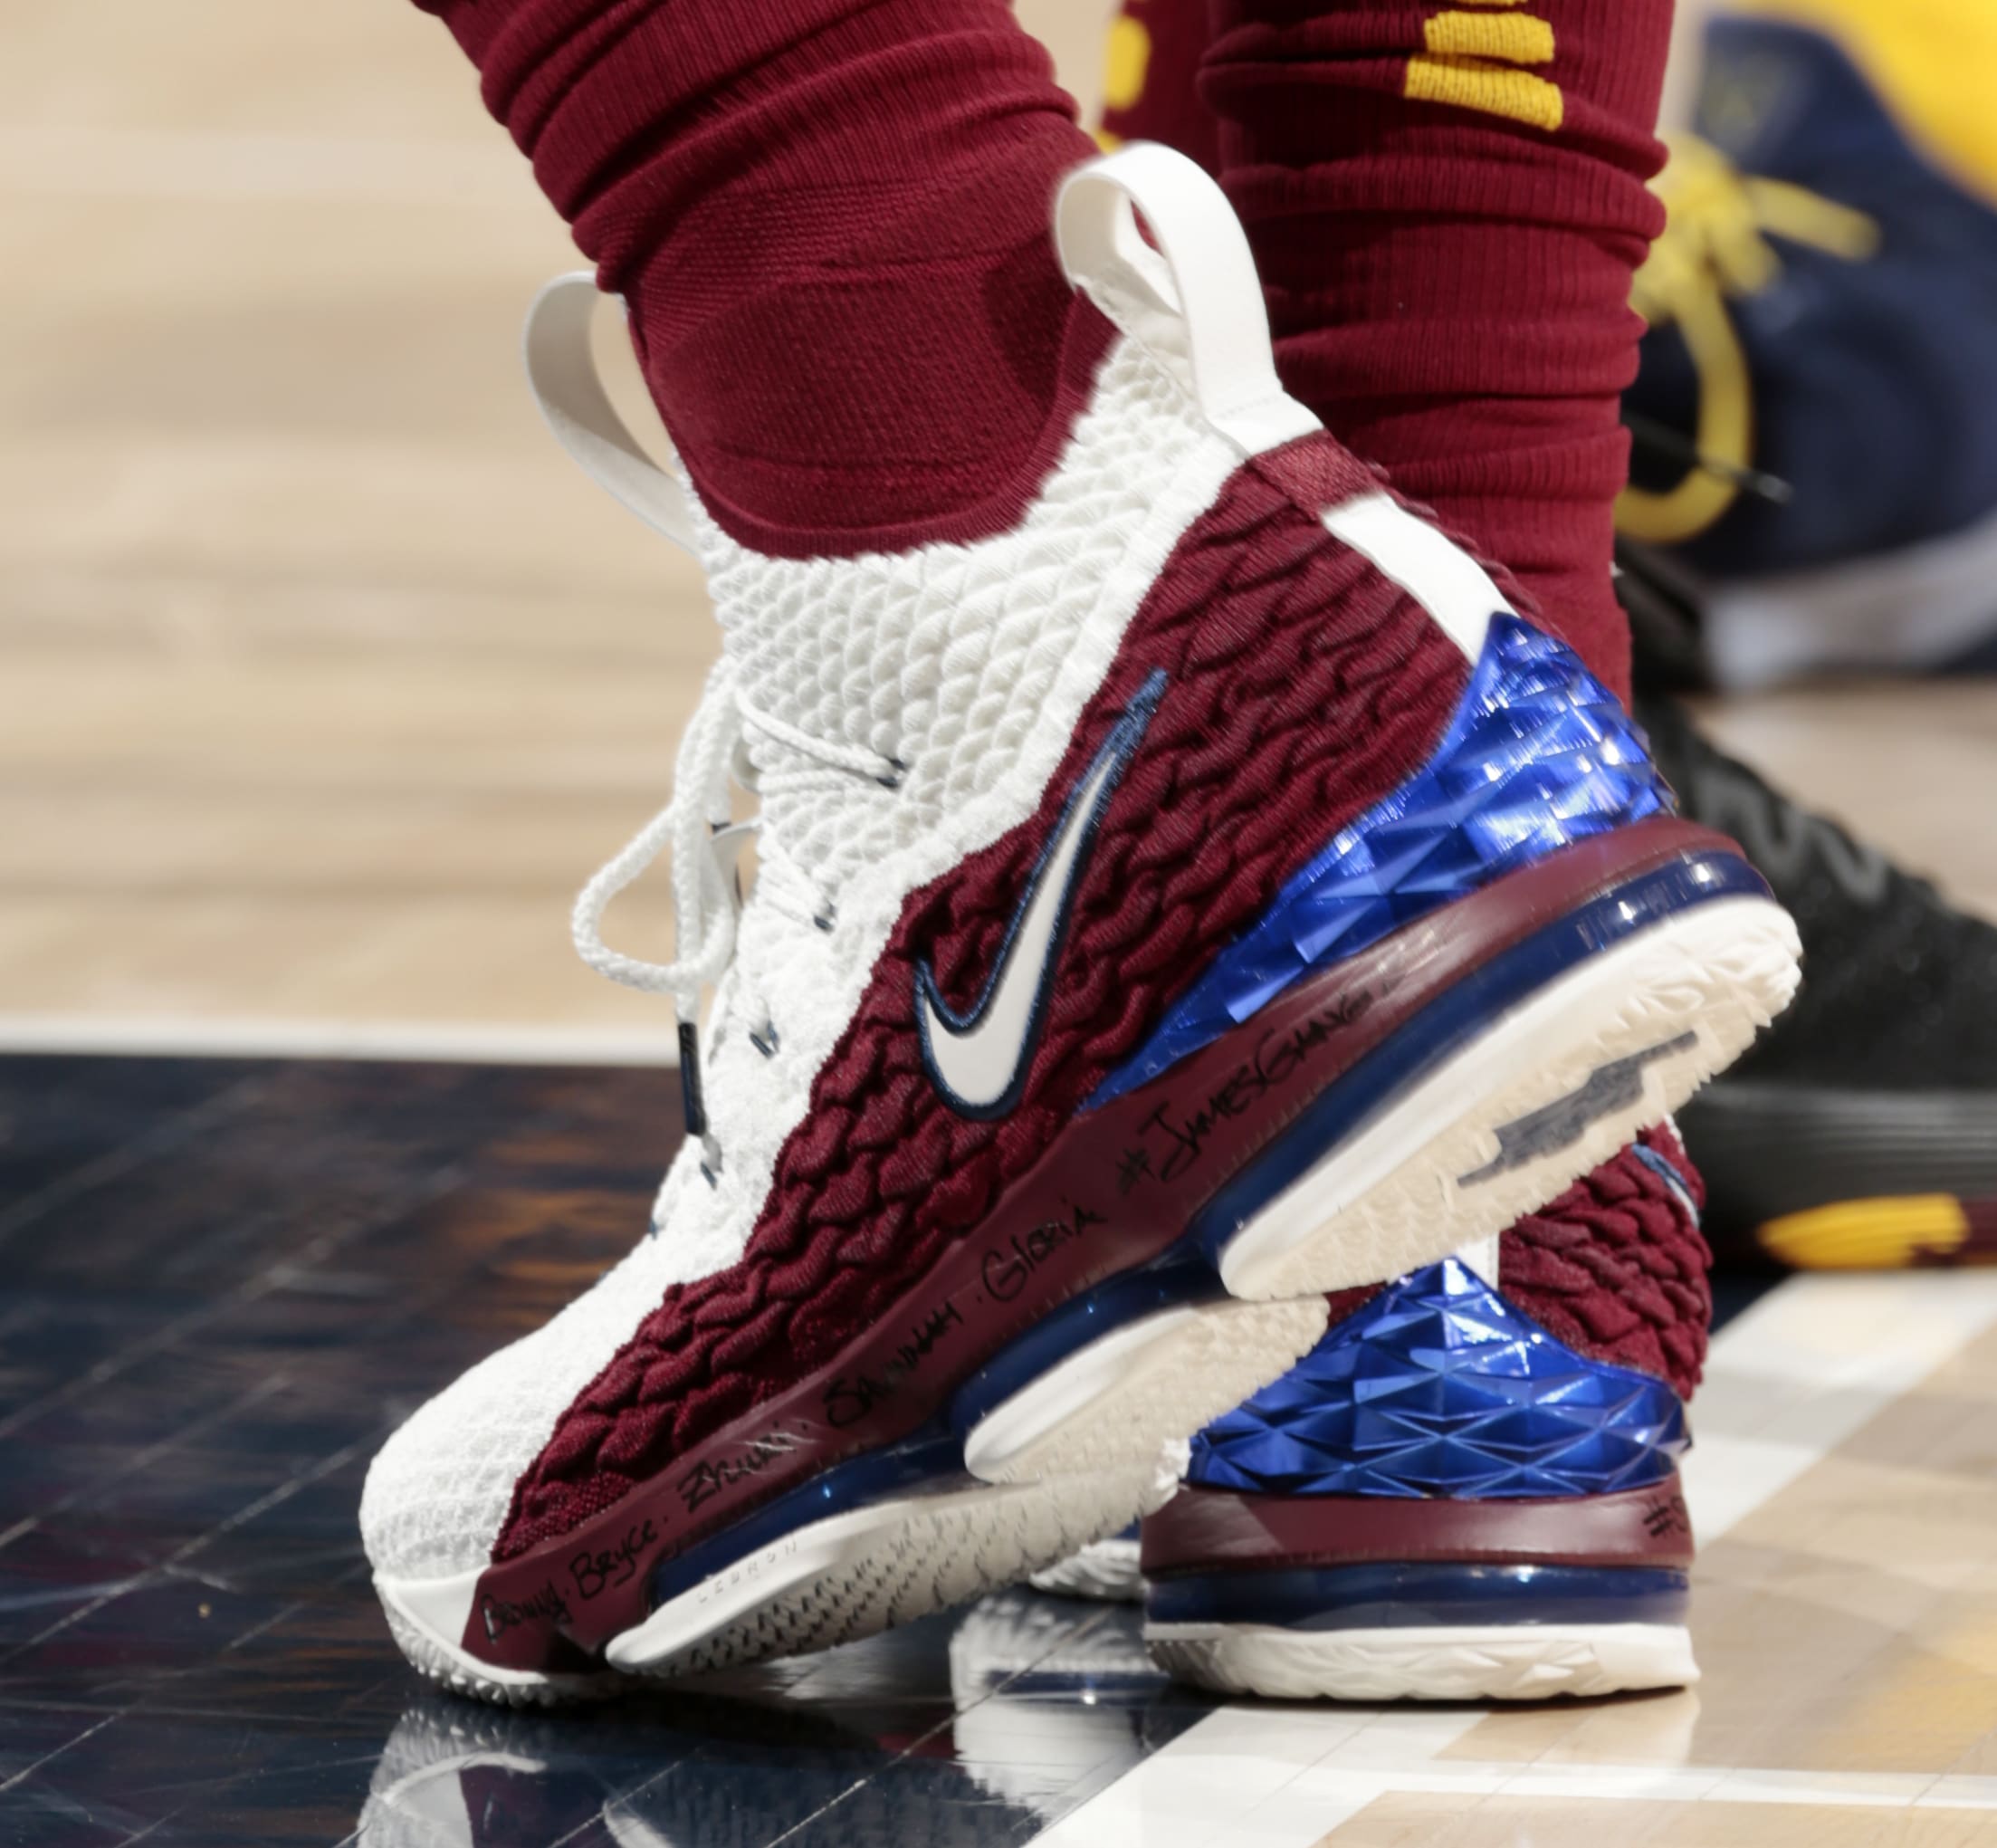 SoleWatch: LeBron James Scores 57 Points in the 'Ghost' Nike LeBron 15